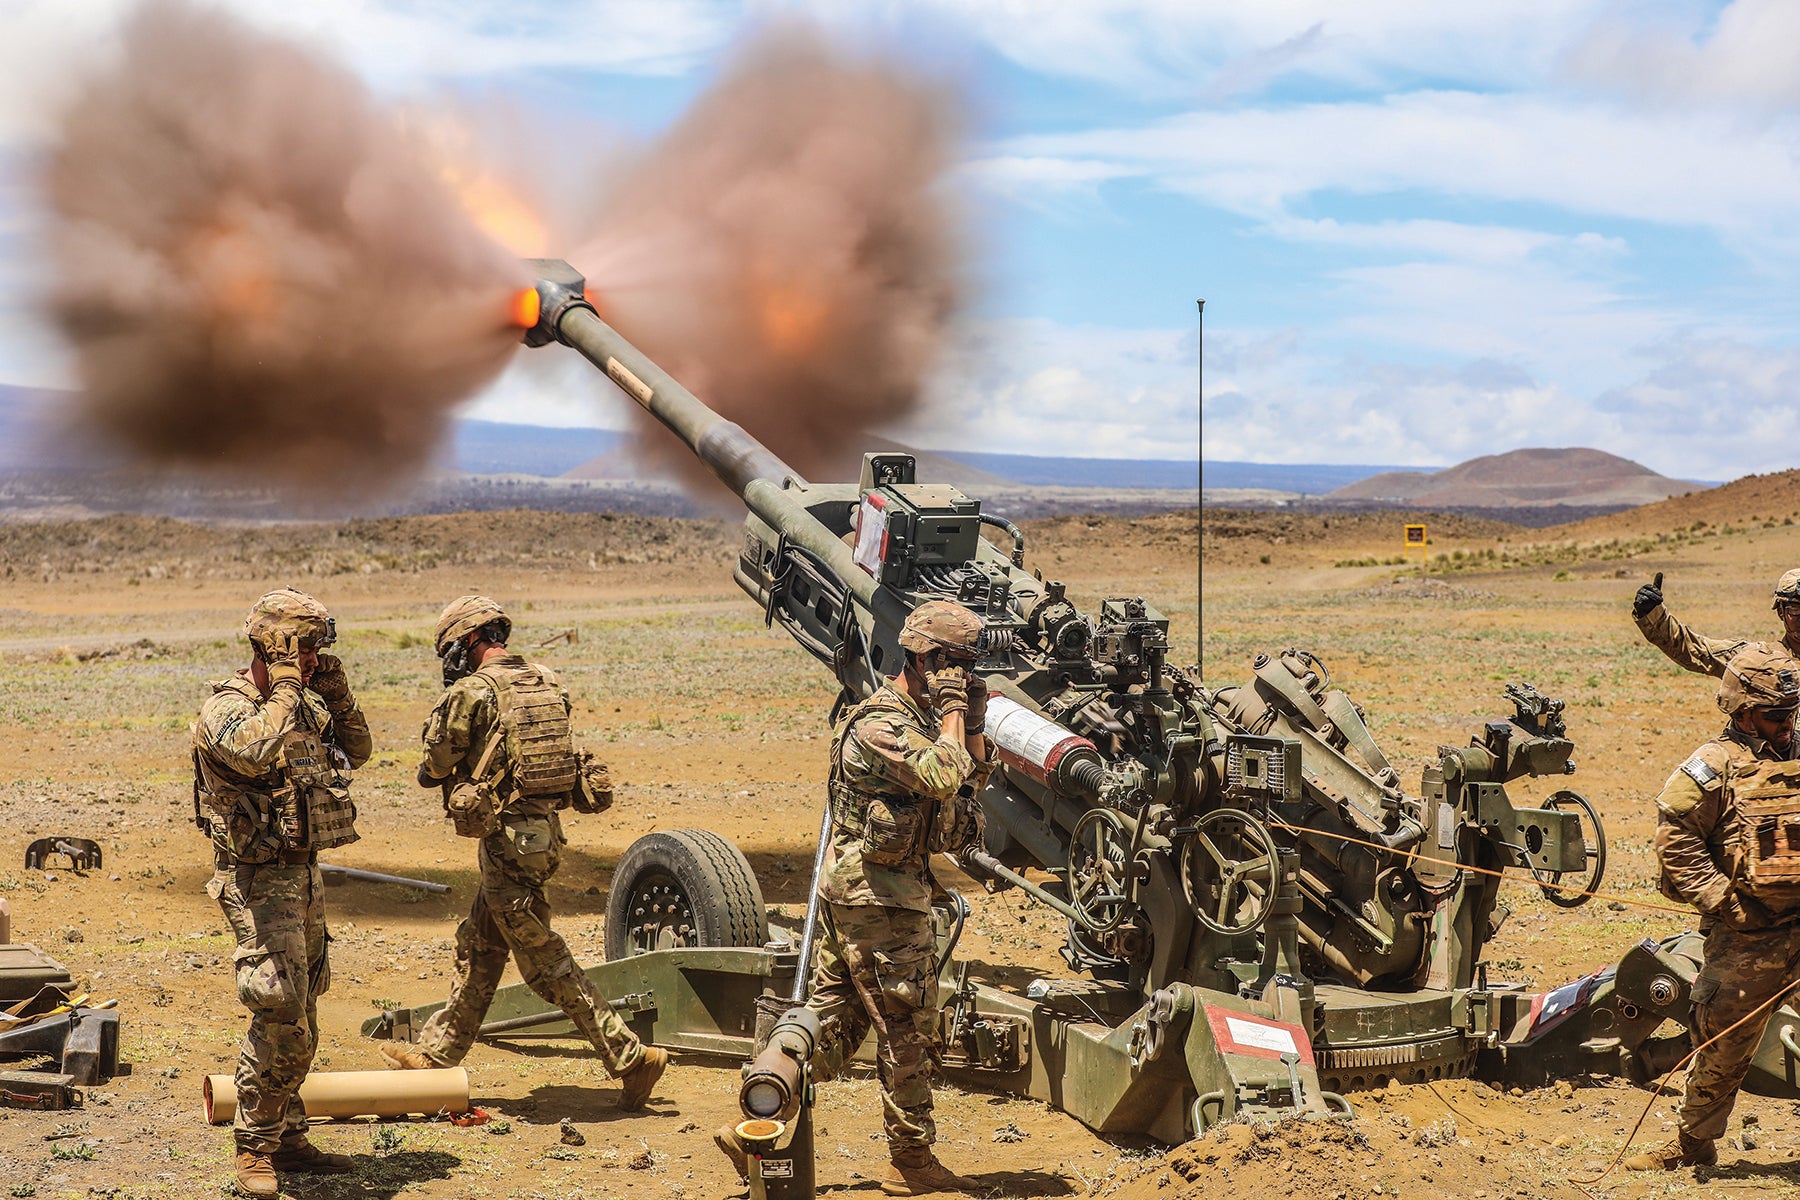 Soldiers with the 25th Infantry Division fire a howitzer during training in Hawaii. (Credit: U.S. Army/1st Lt. David Block)